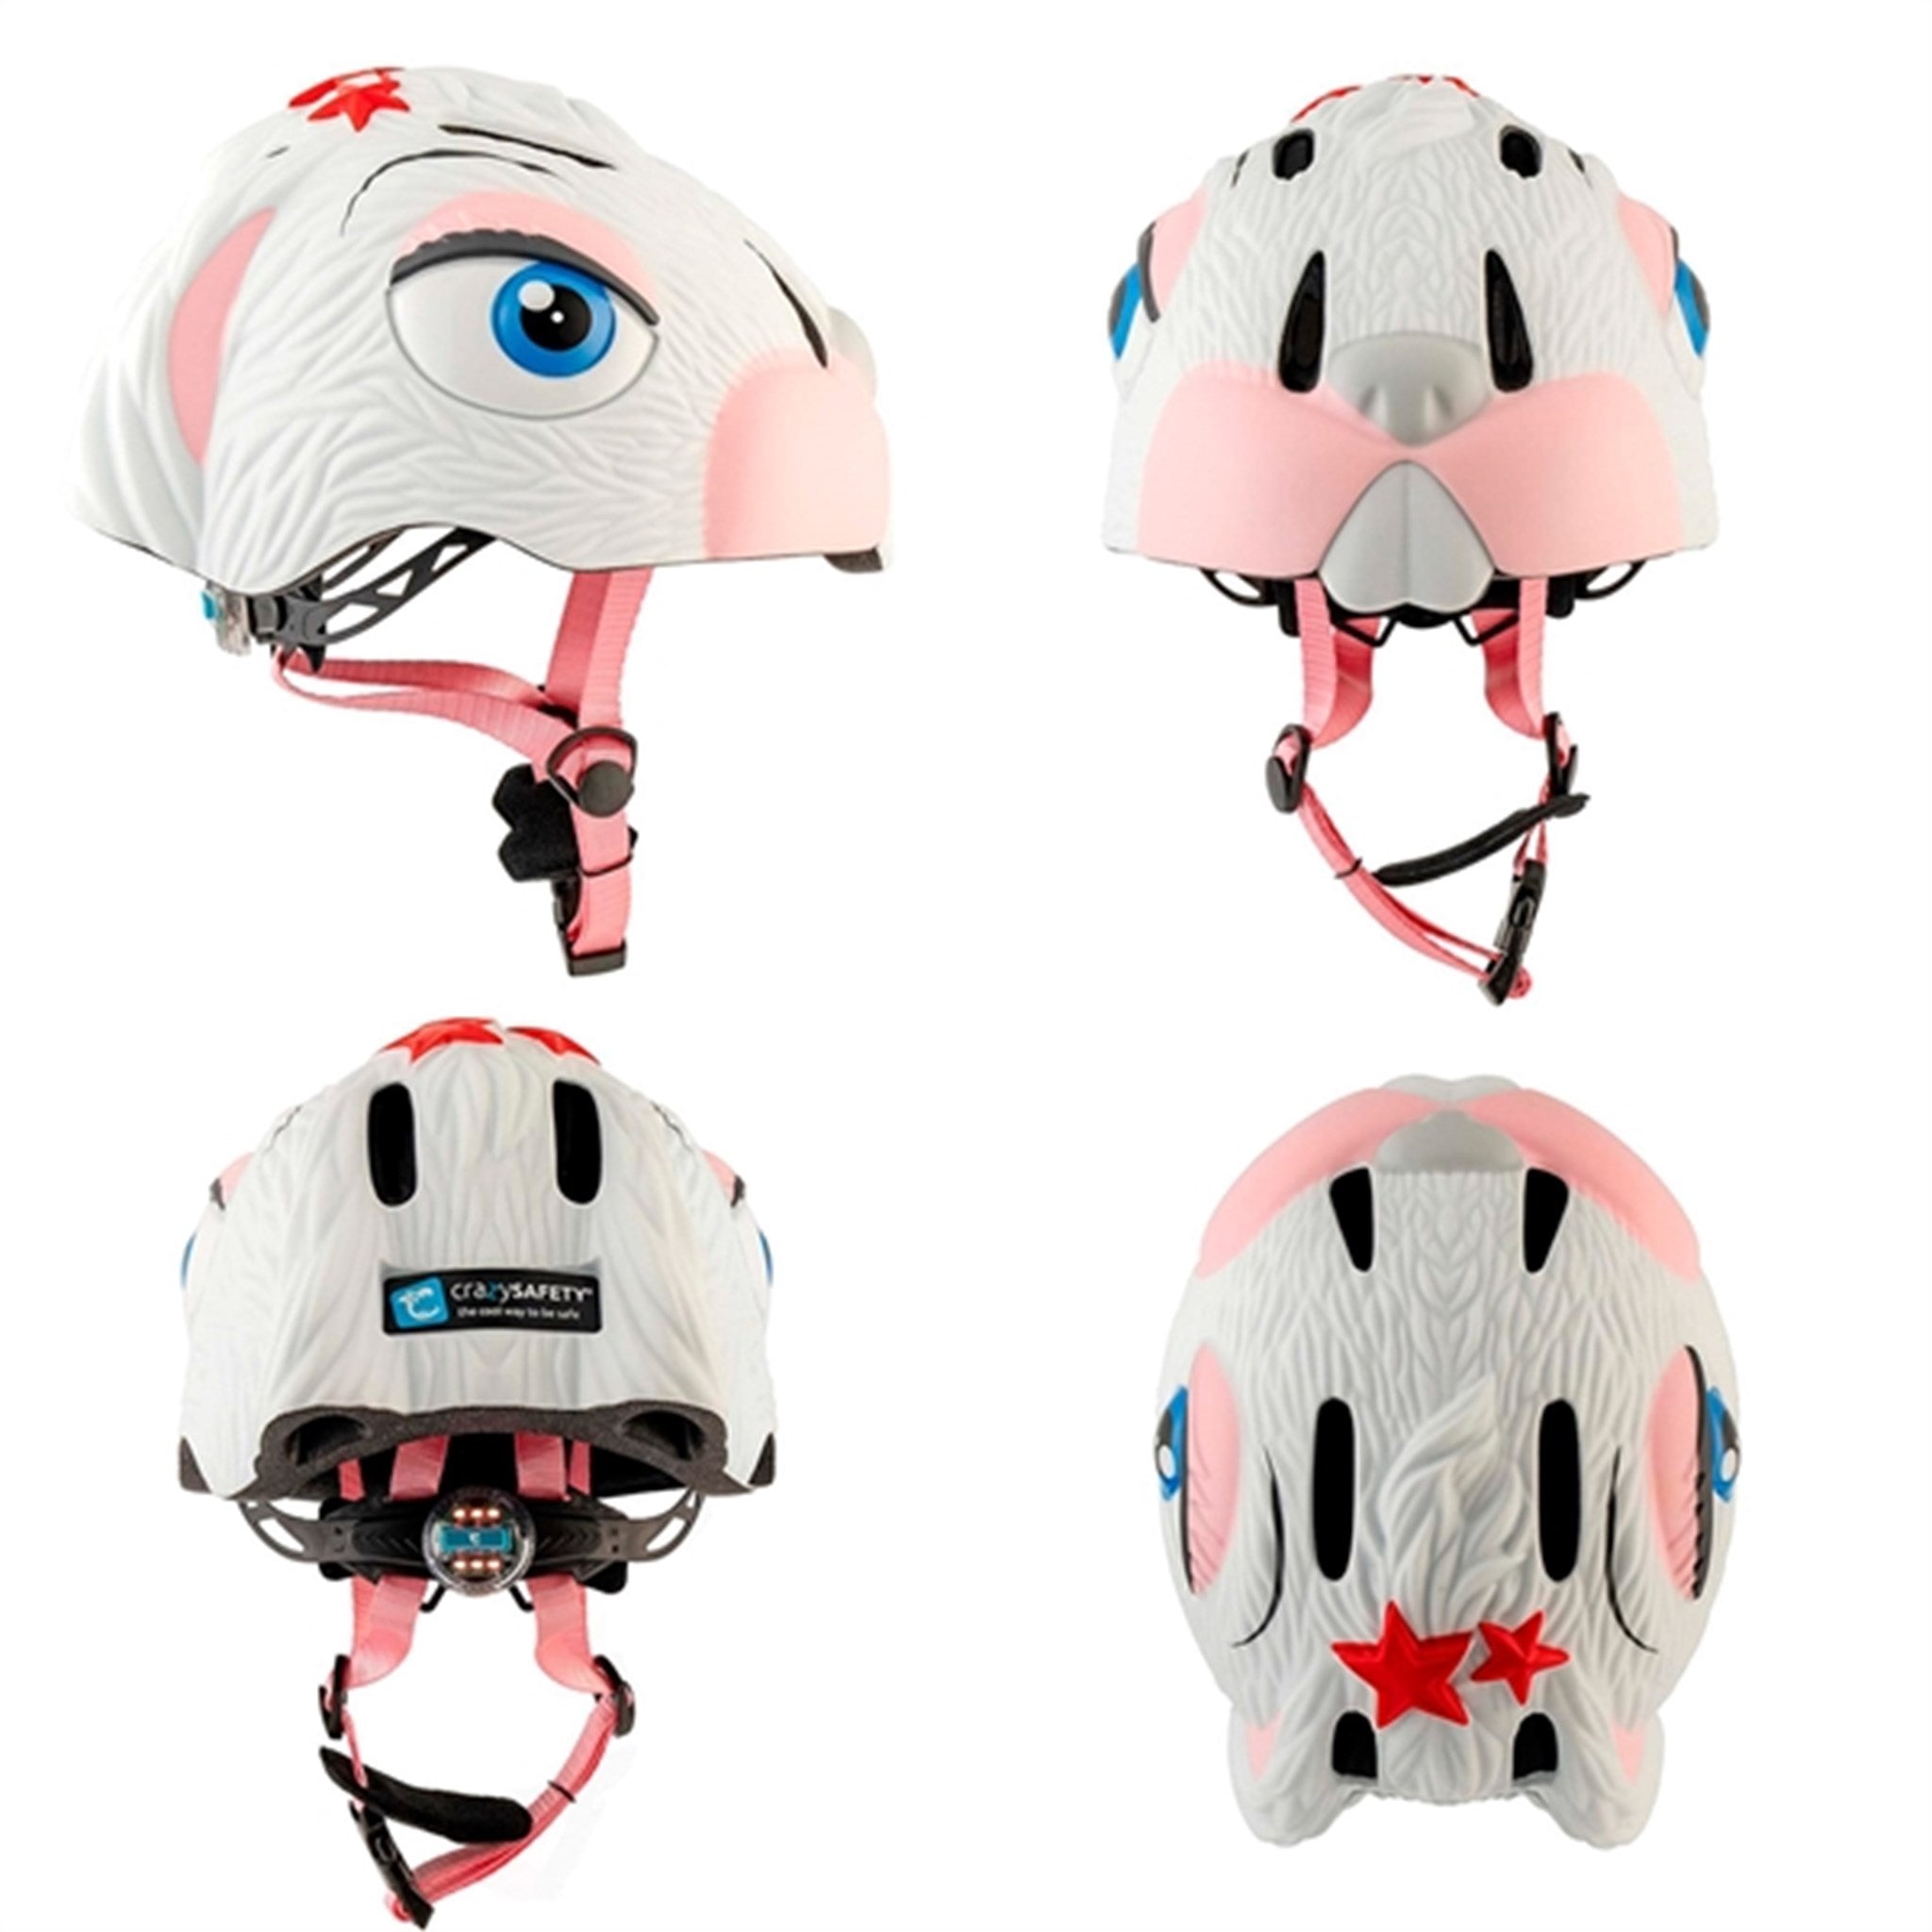 Crazy Safety Bunny Bicycle Helmet White 5